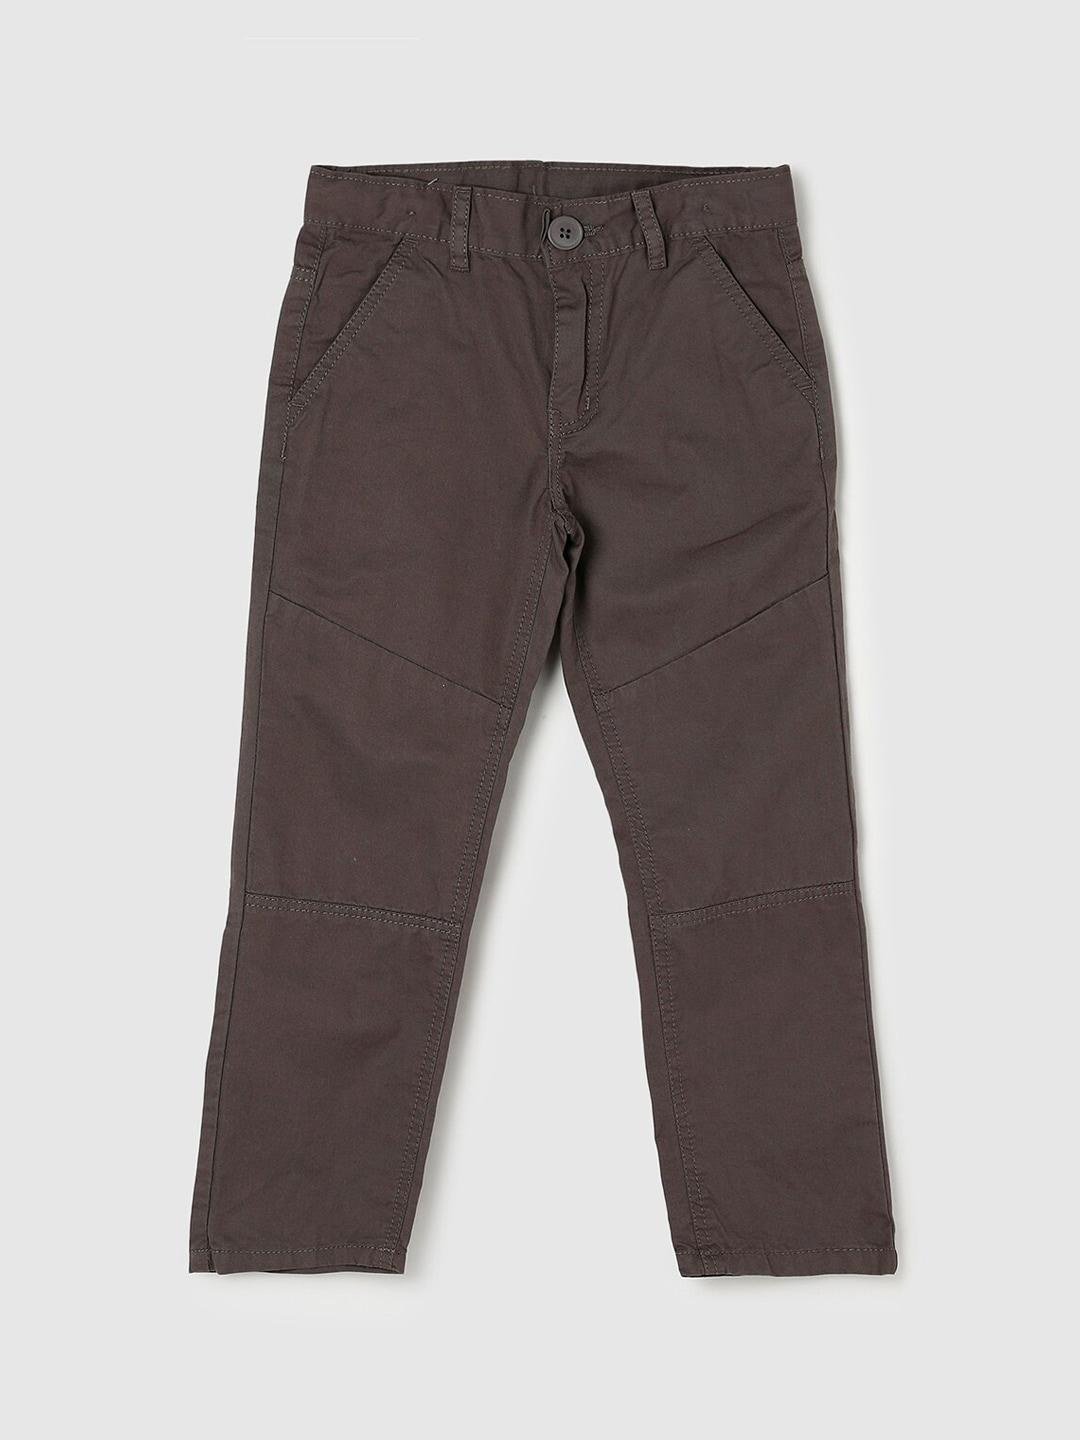 max Boys Brown Trousers